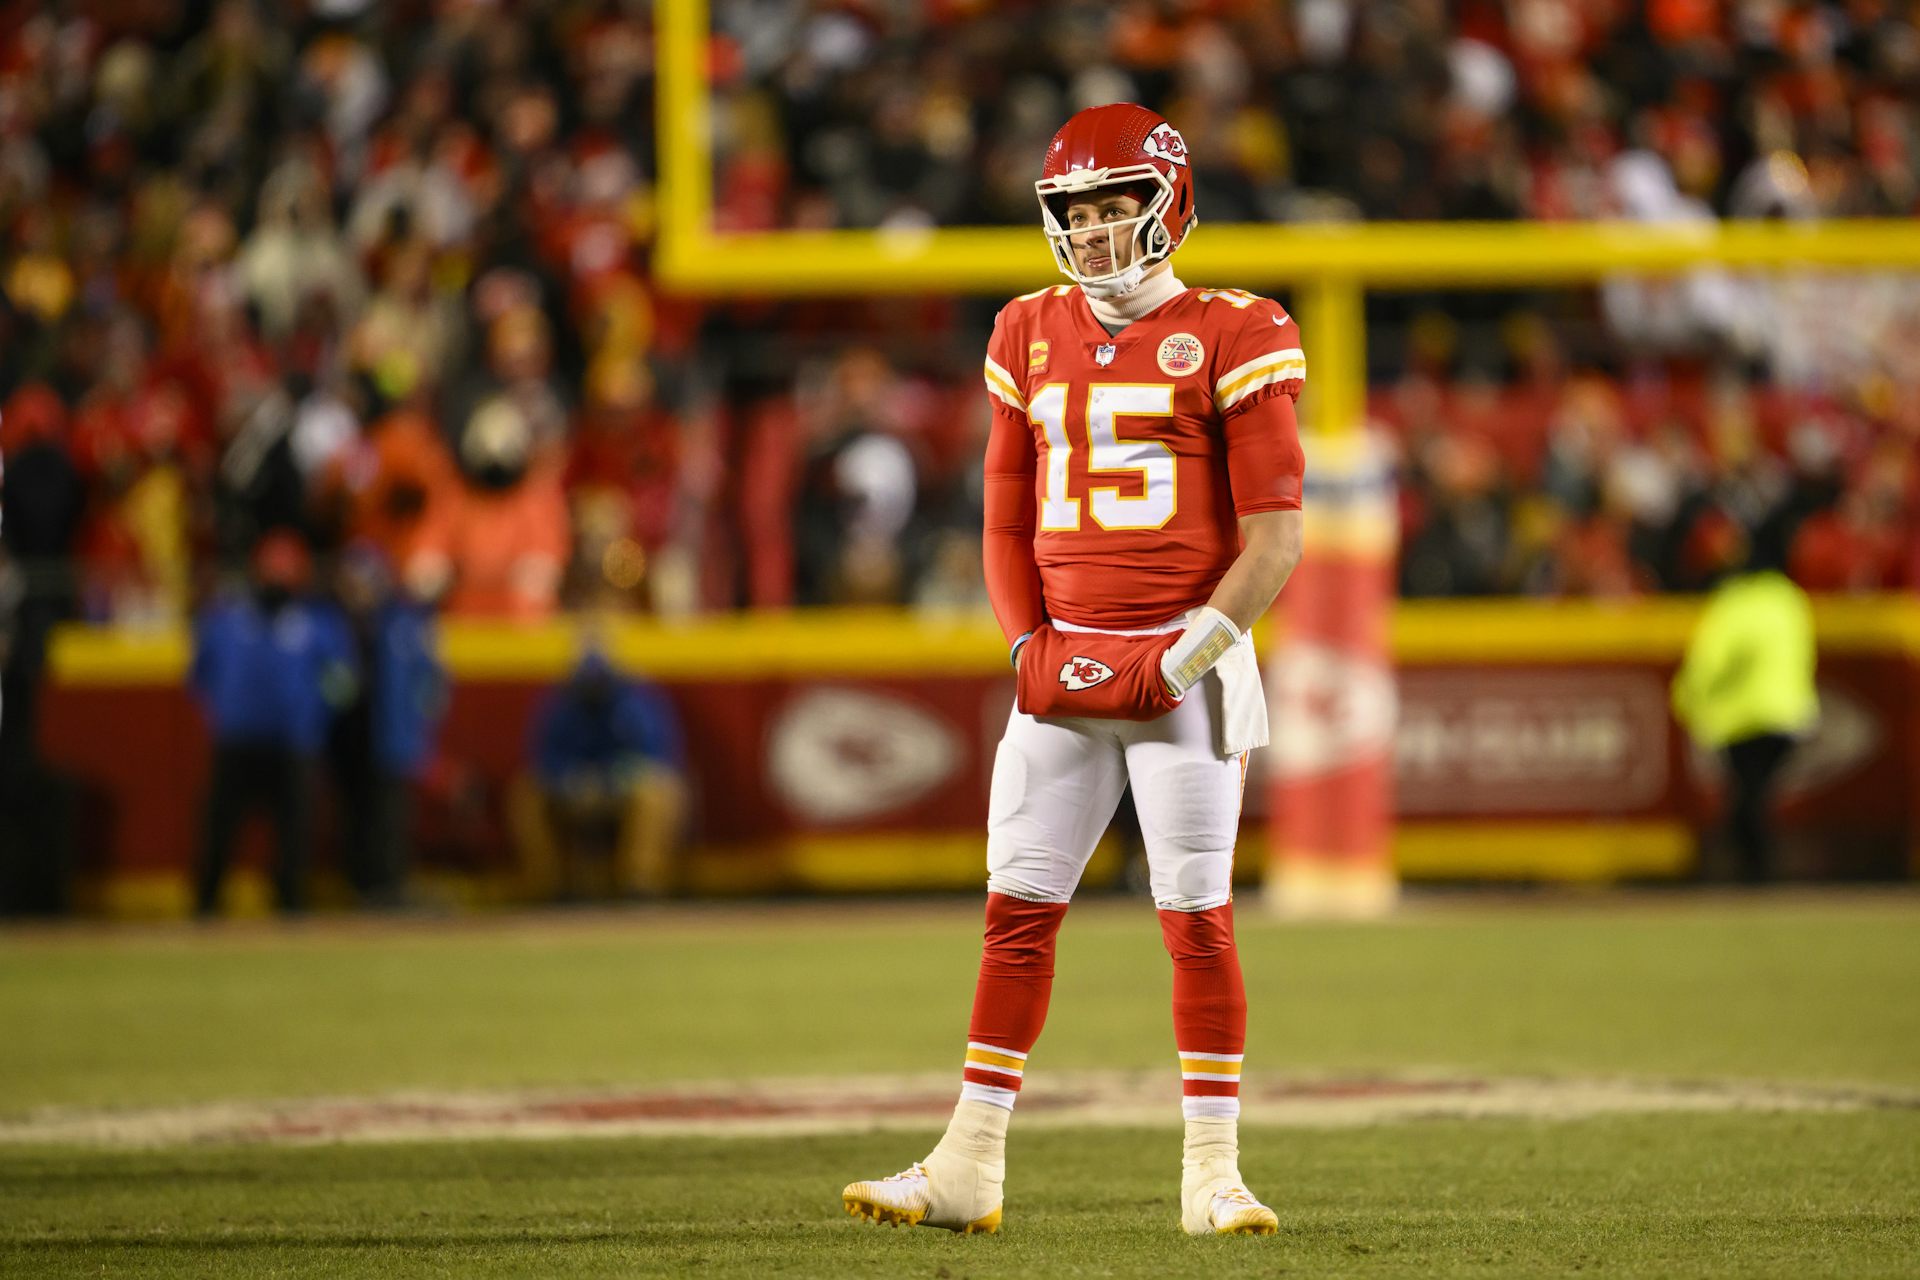 Patrick Mahomes injury: An ankle surgeon explains what a high